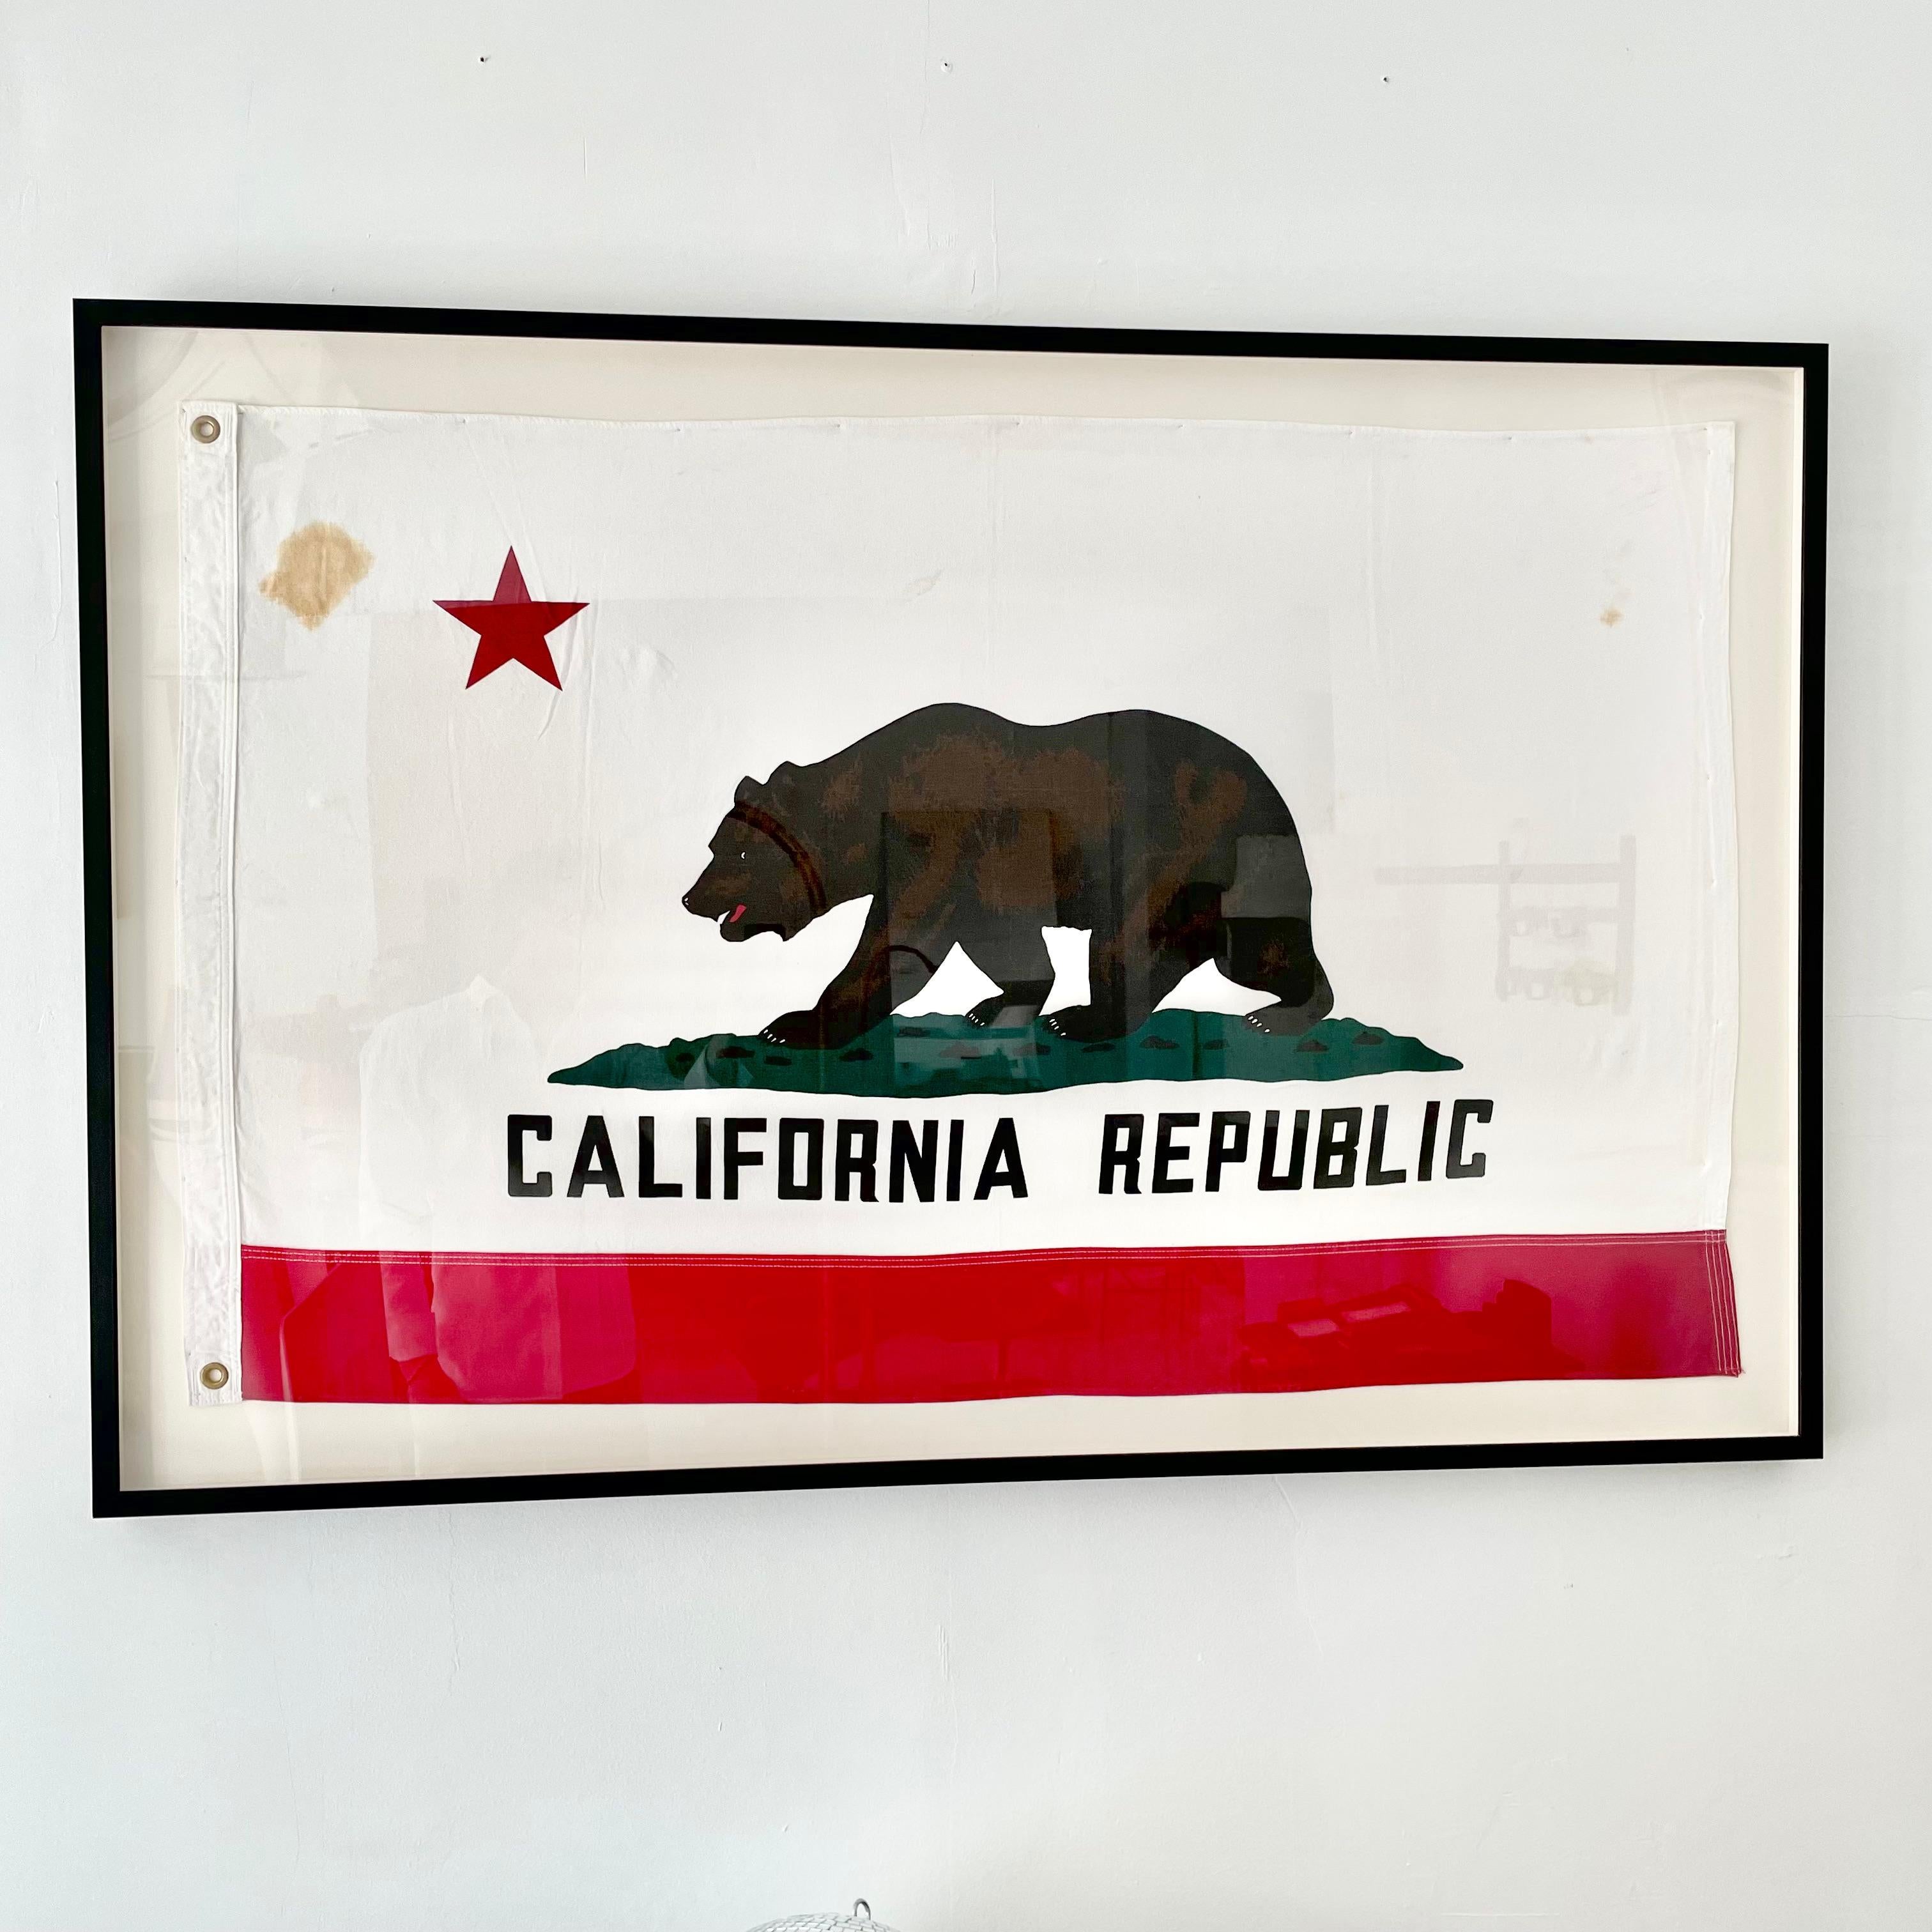 Vintage California Republic flag made in the 1960s. Made of thick cotton. Great coloring. Fun piece of California history. Newly mounted on a linen shadow box, with black frame and plexiglass. Stain at top right and left. Cool piece of art. Only one